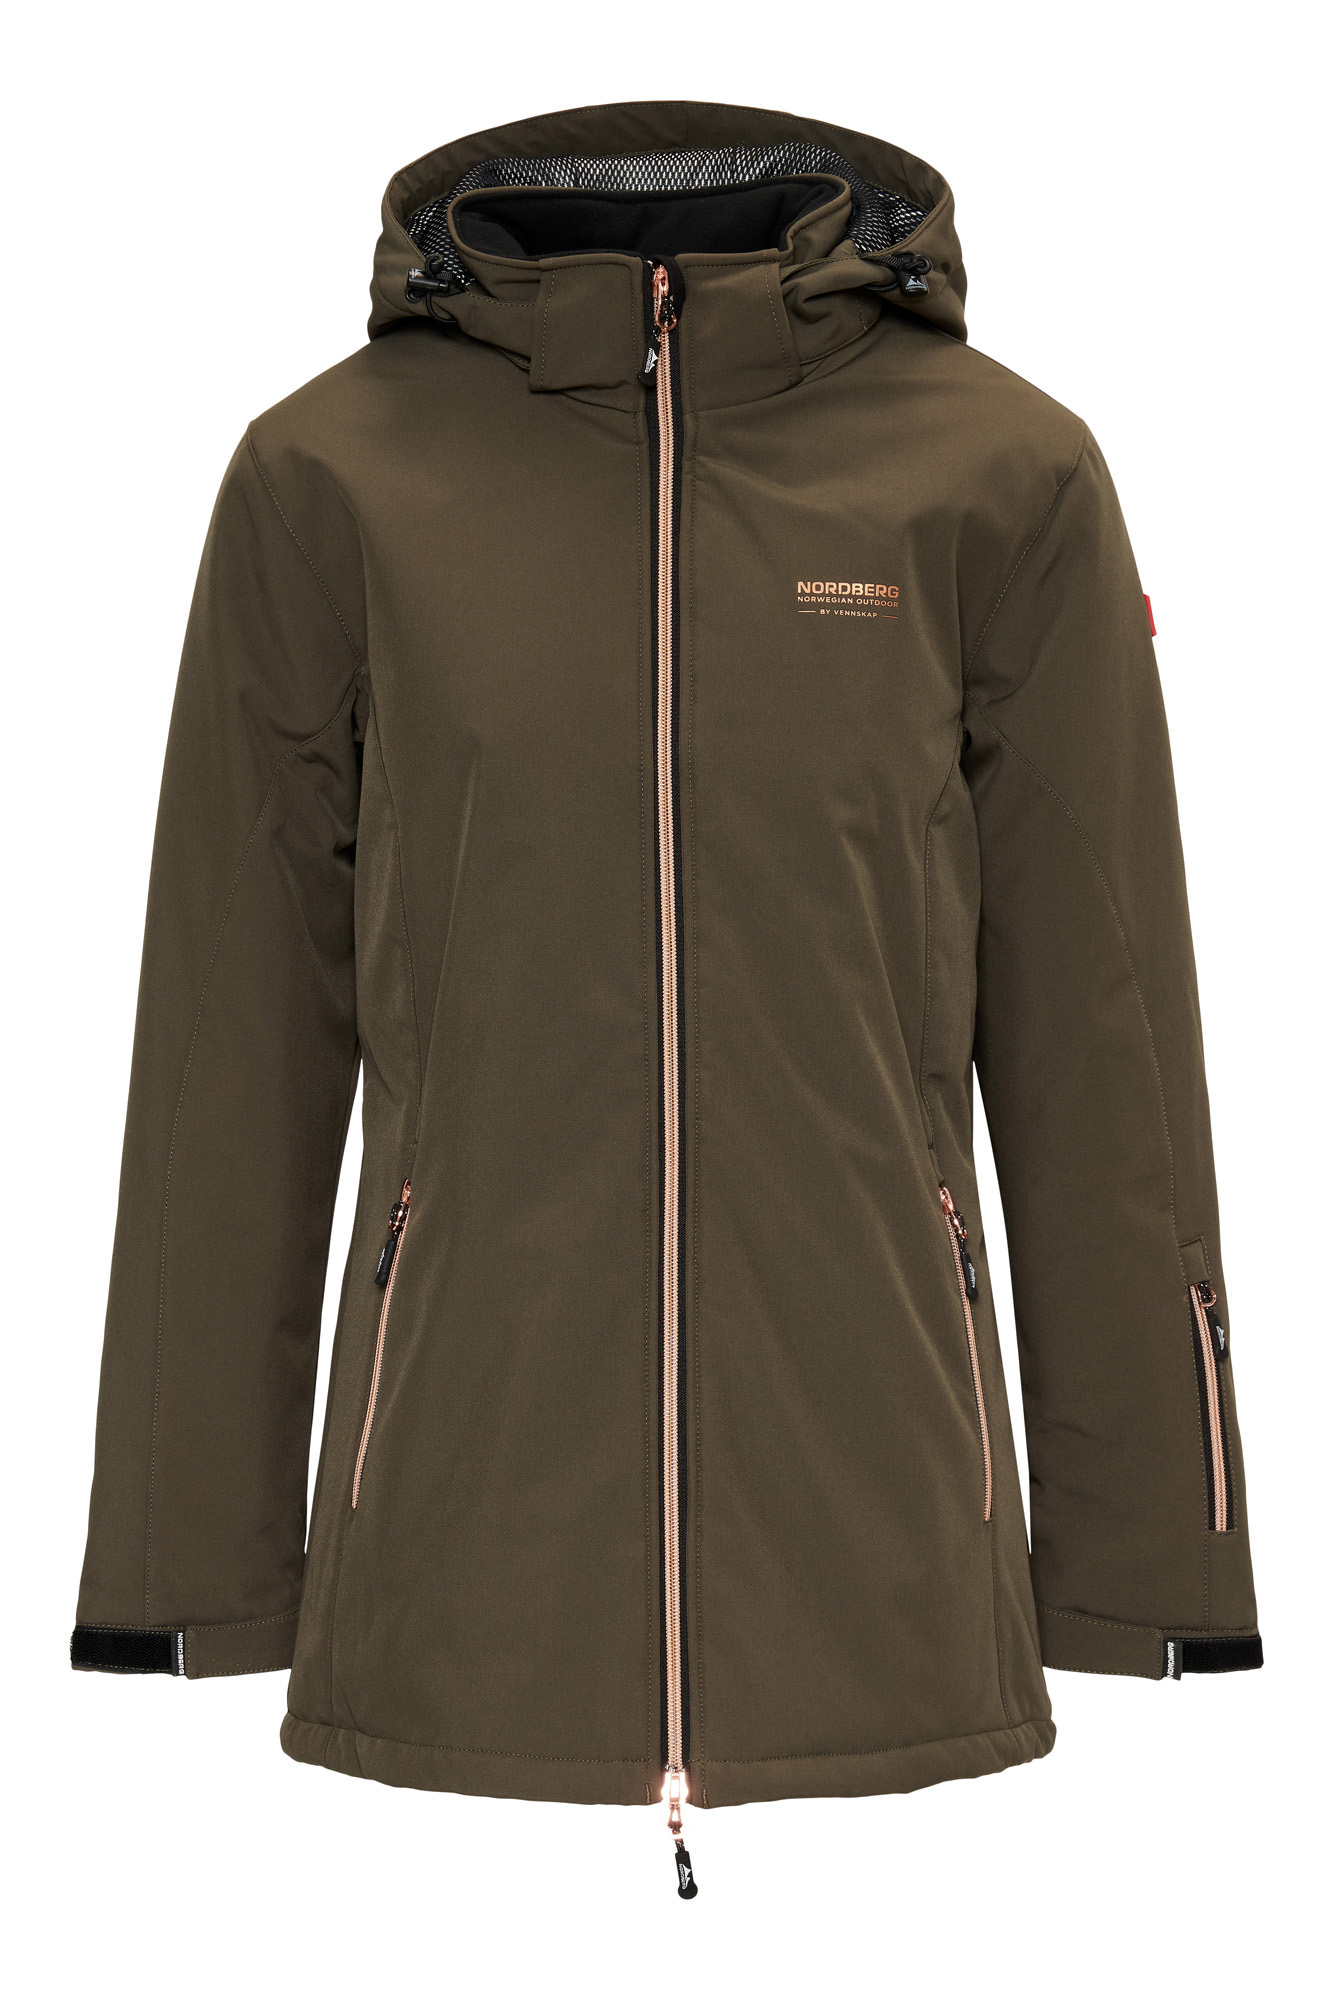 Astera Padded Softshell Army - Nordberg Outdoor